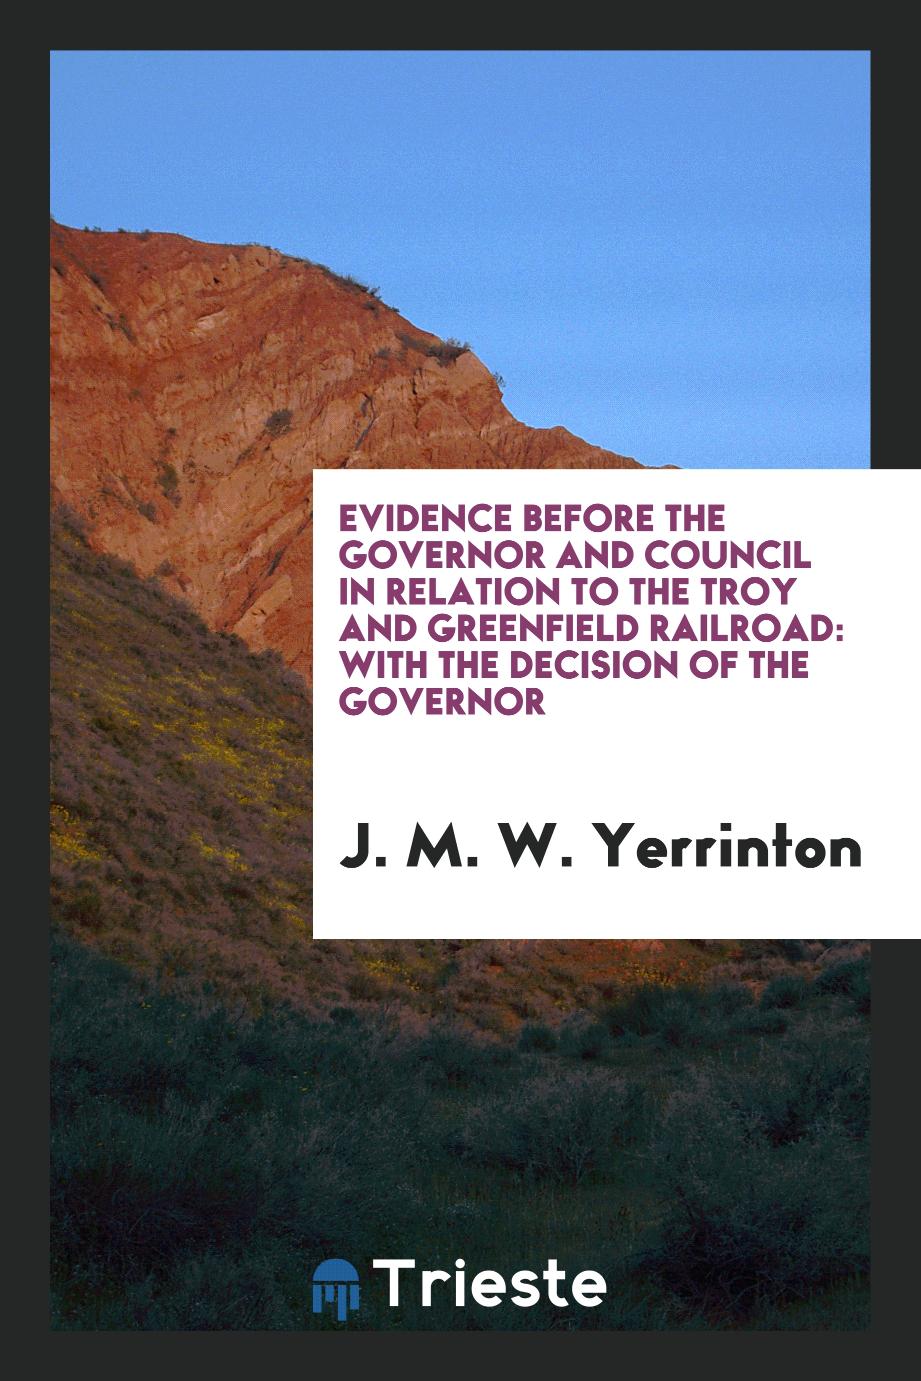 Evidence Before the Governor and Council in Relation to the Troy and Greenfield Railroad: with the decision of the governor